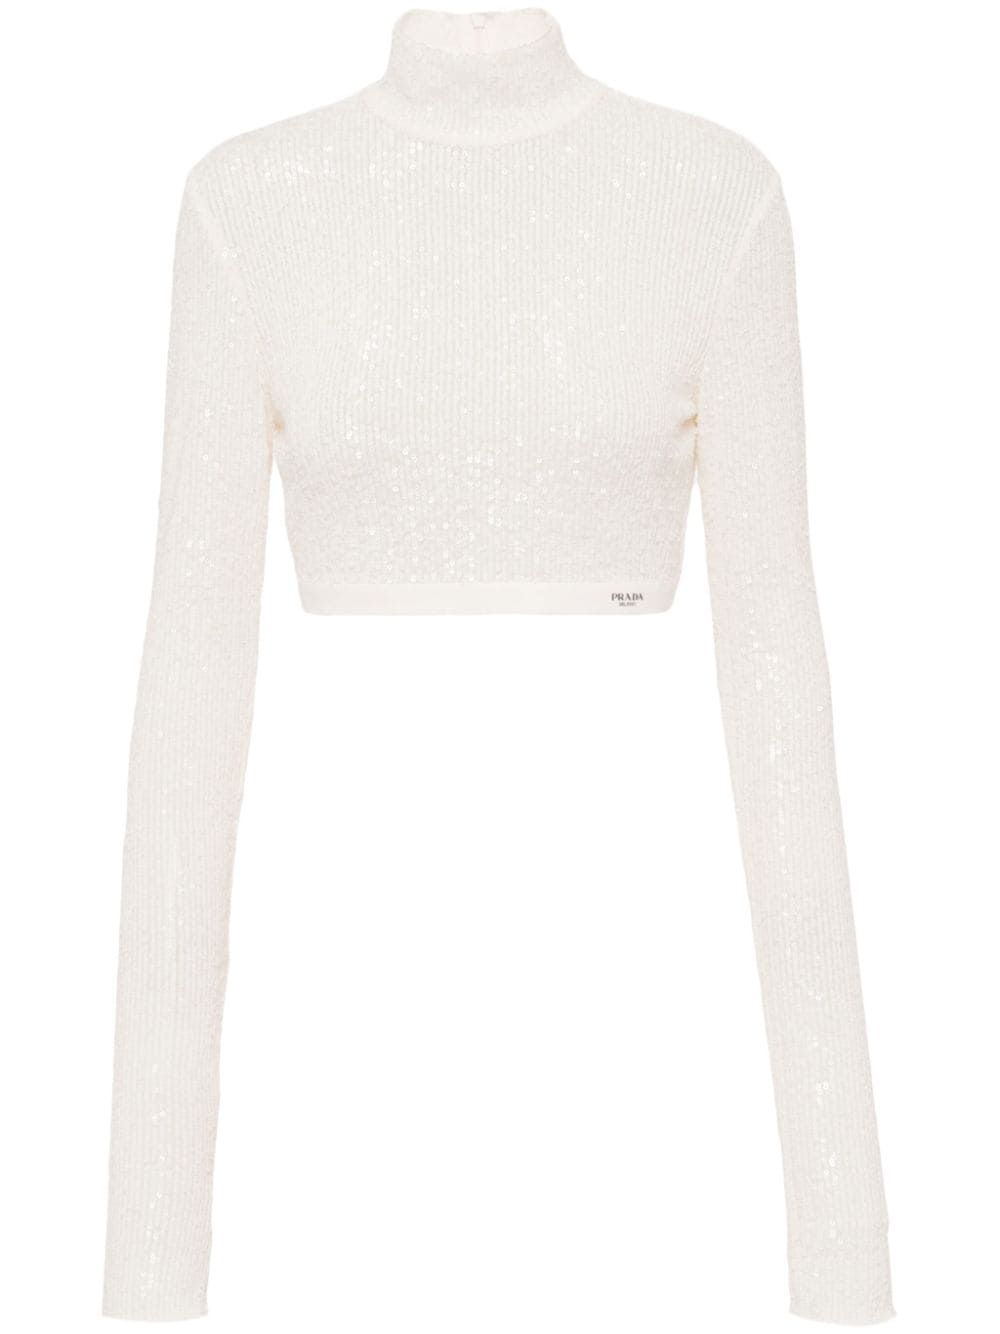 Prada Sequinned Cropped Top In White